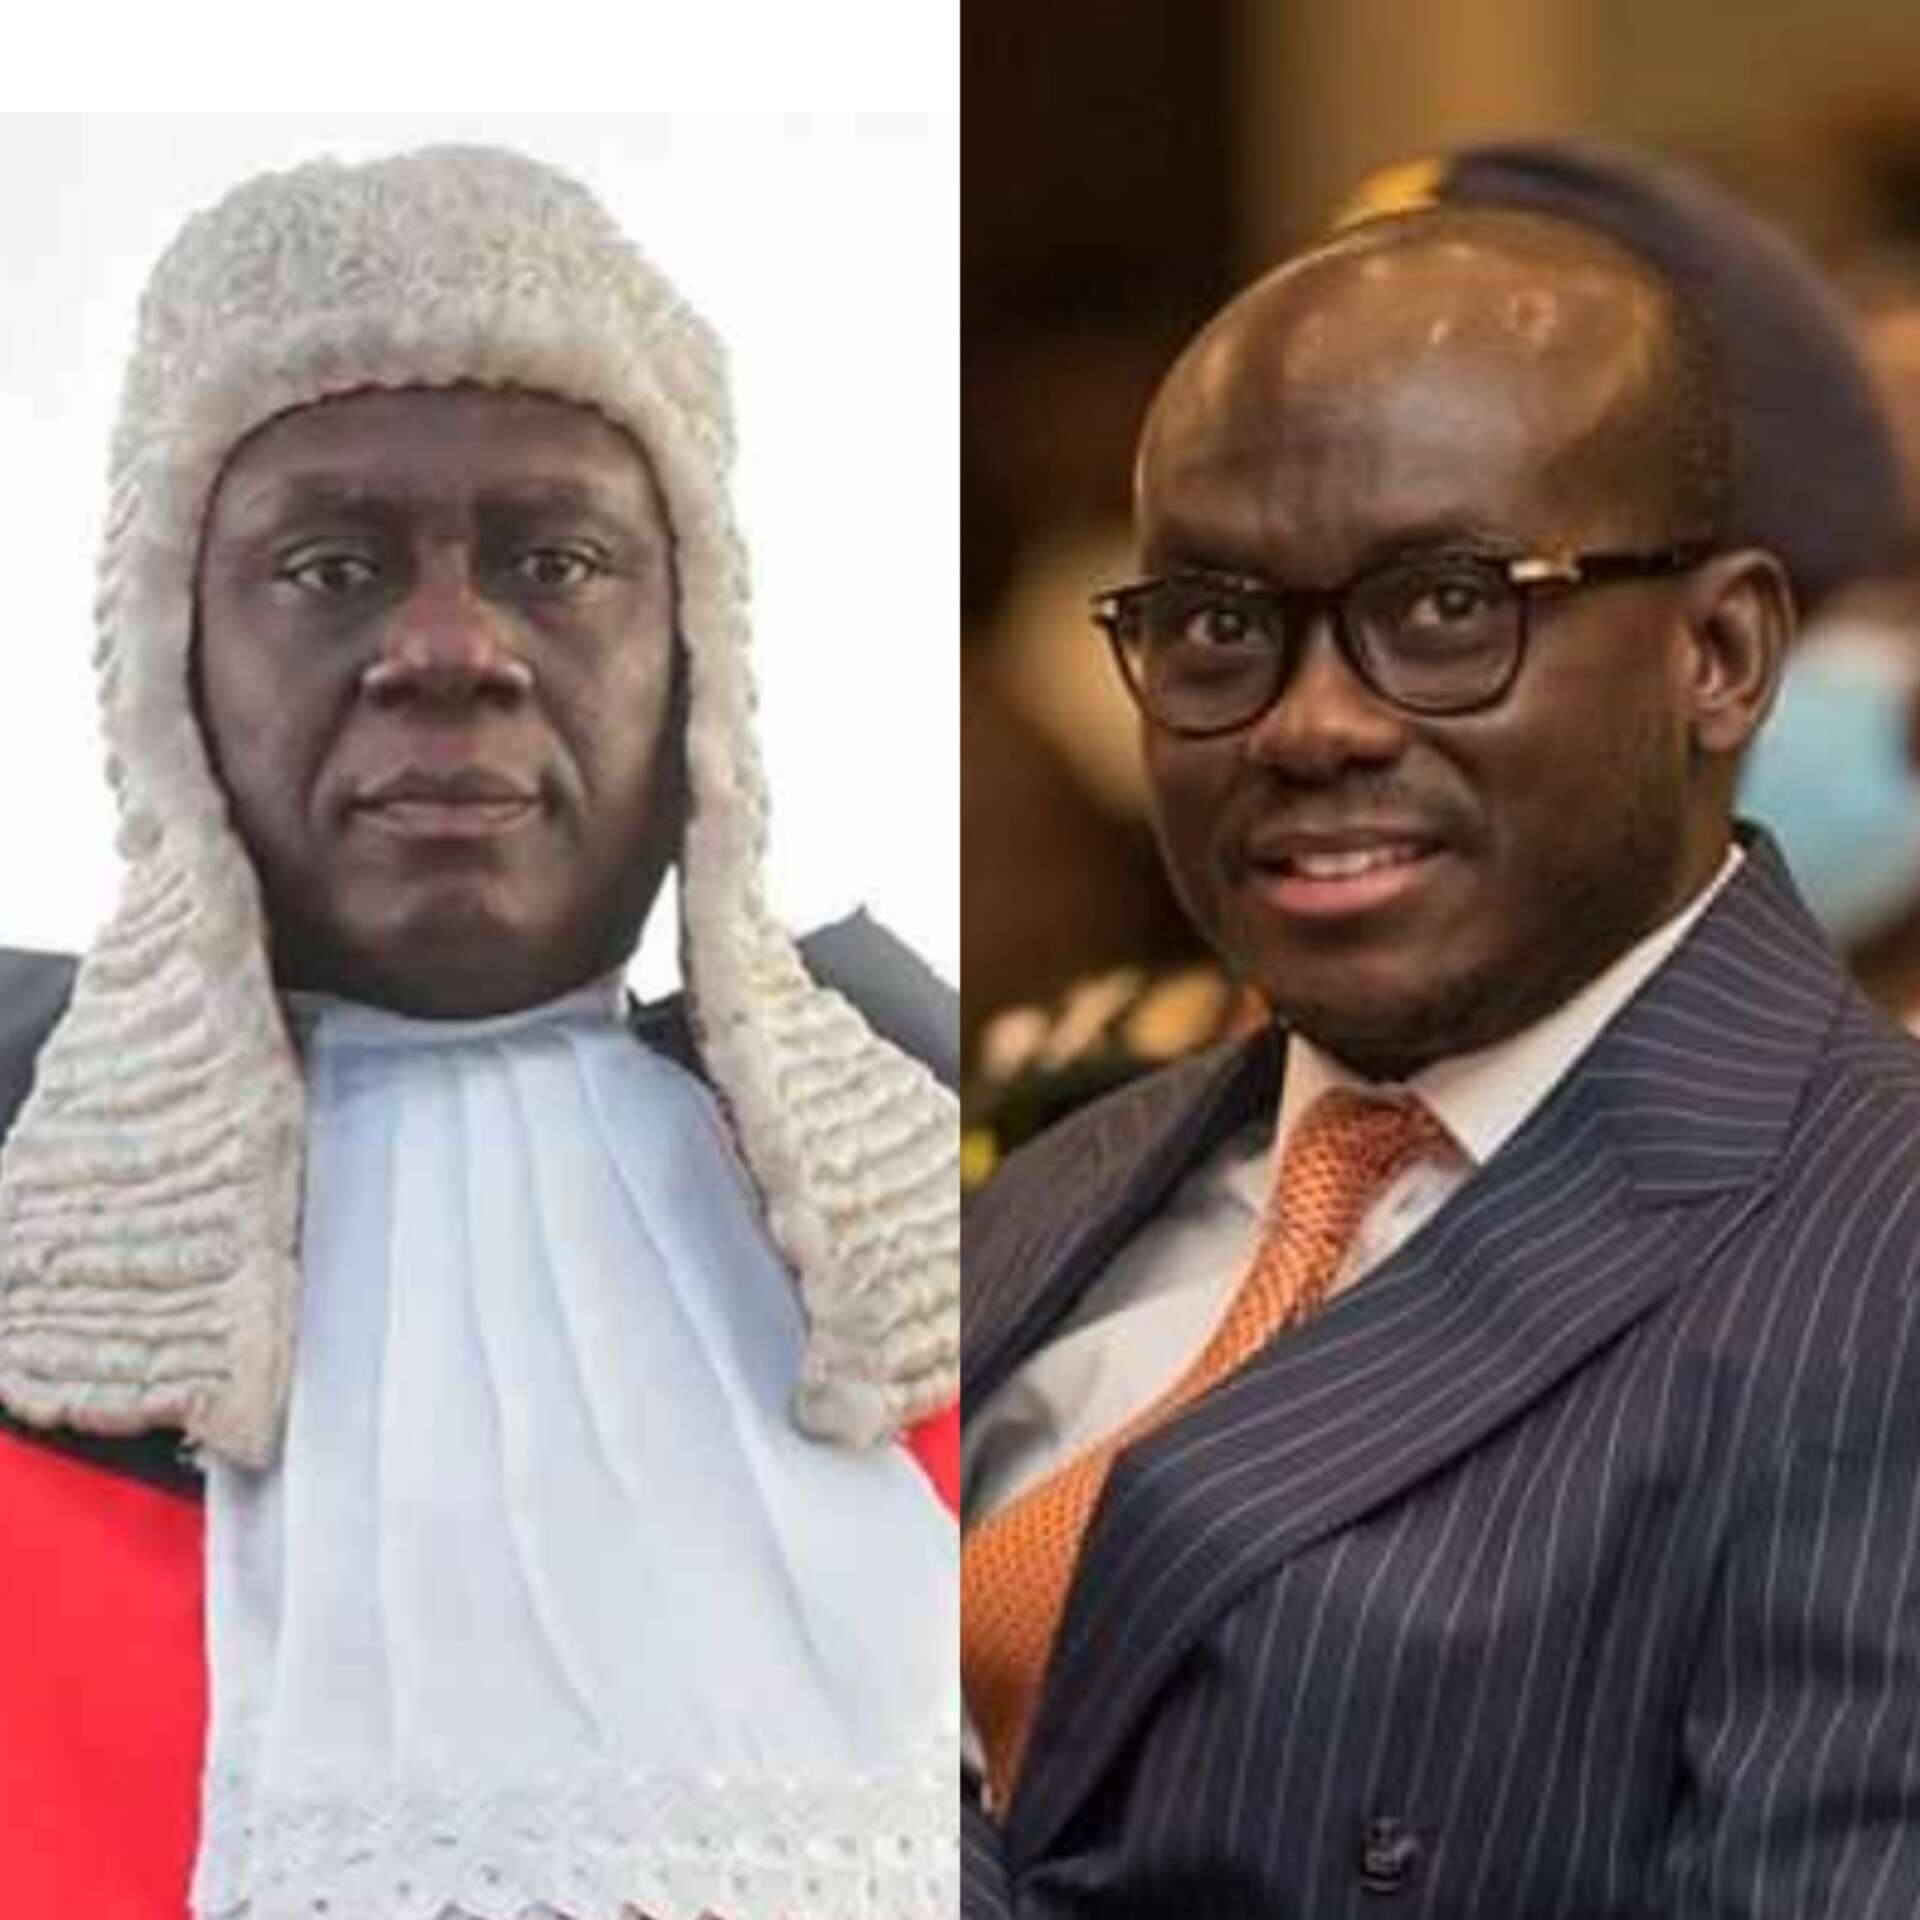 No matter how long it takes, Ghana Chief Justice and Attorney-General shall be liable for CRIMINAL NEGLIGENCE in Bawku!